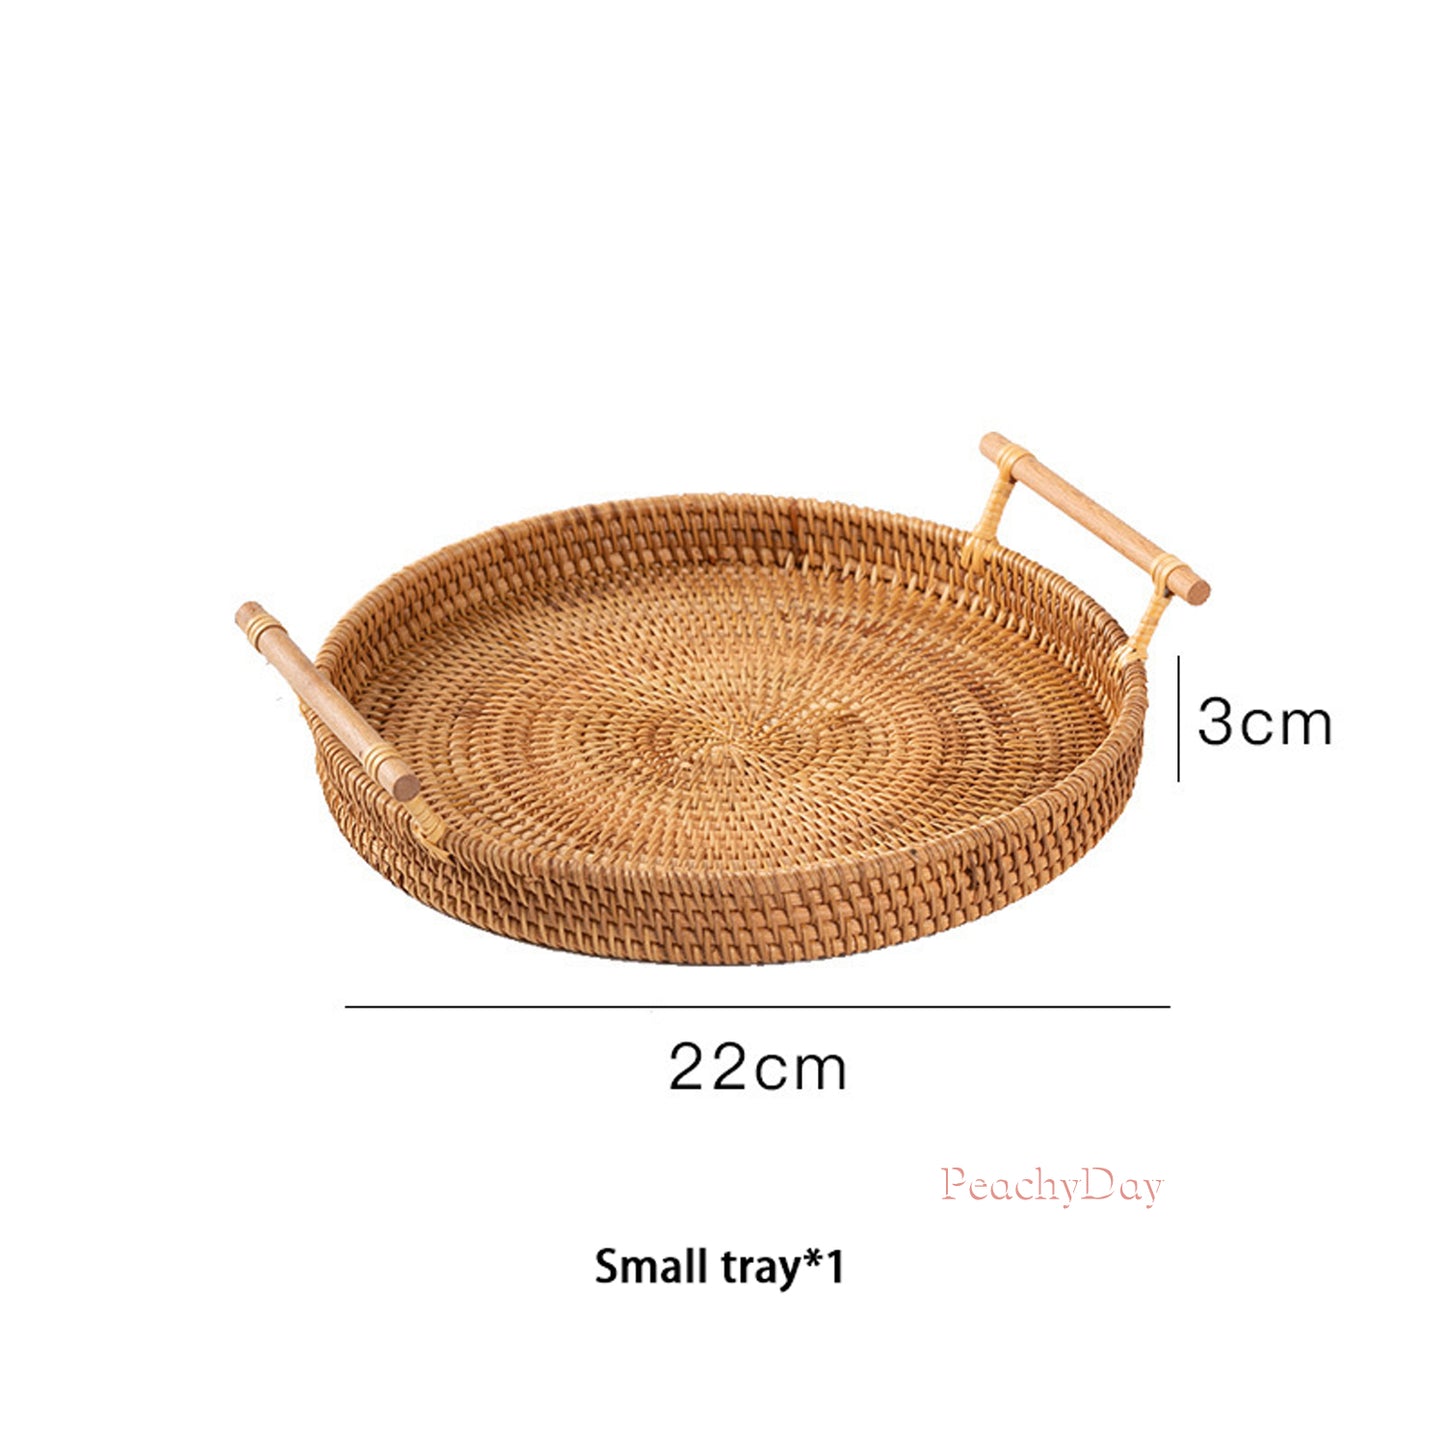 Rattan Storage Tray With Wooden Handle